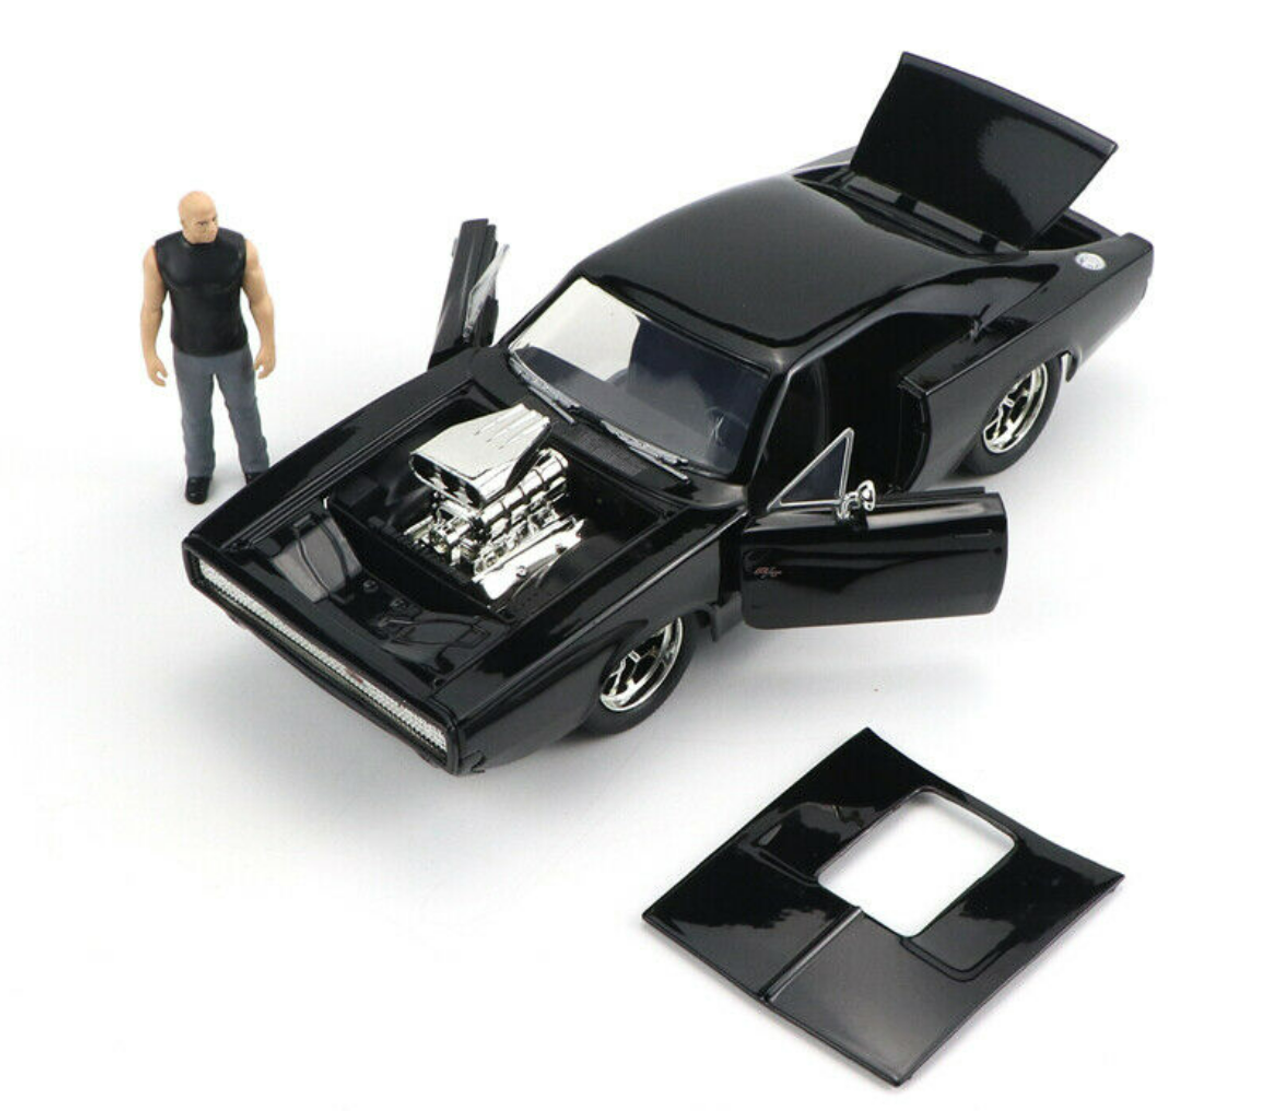 1/24 Jada Dodge Charger R/T Black with Dom Diecast Figurine "Fast & Furious" Movie Diecast Model Car